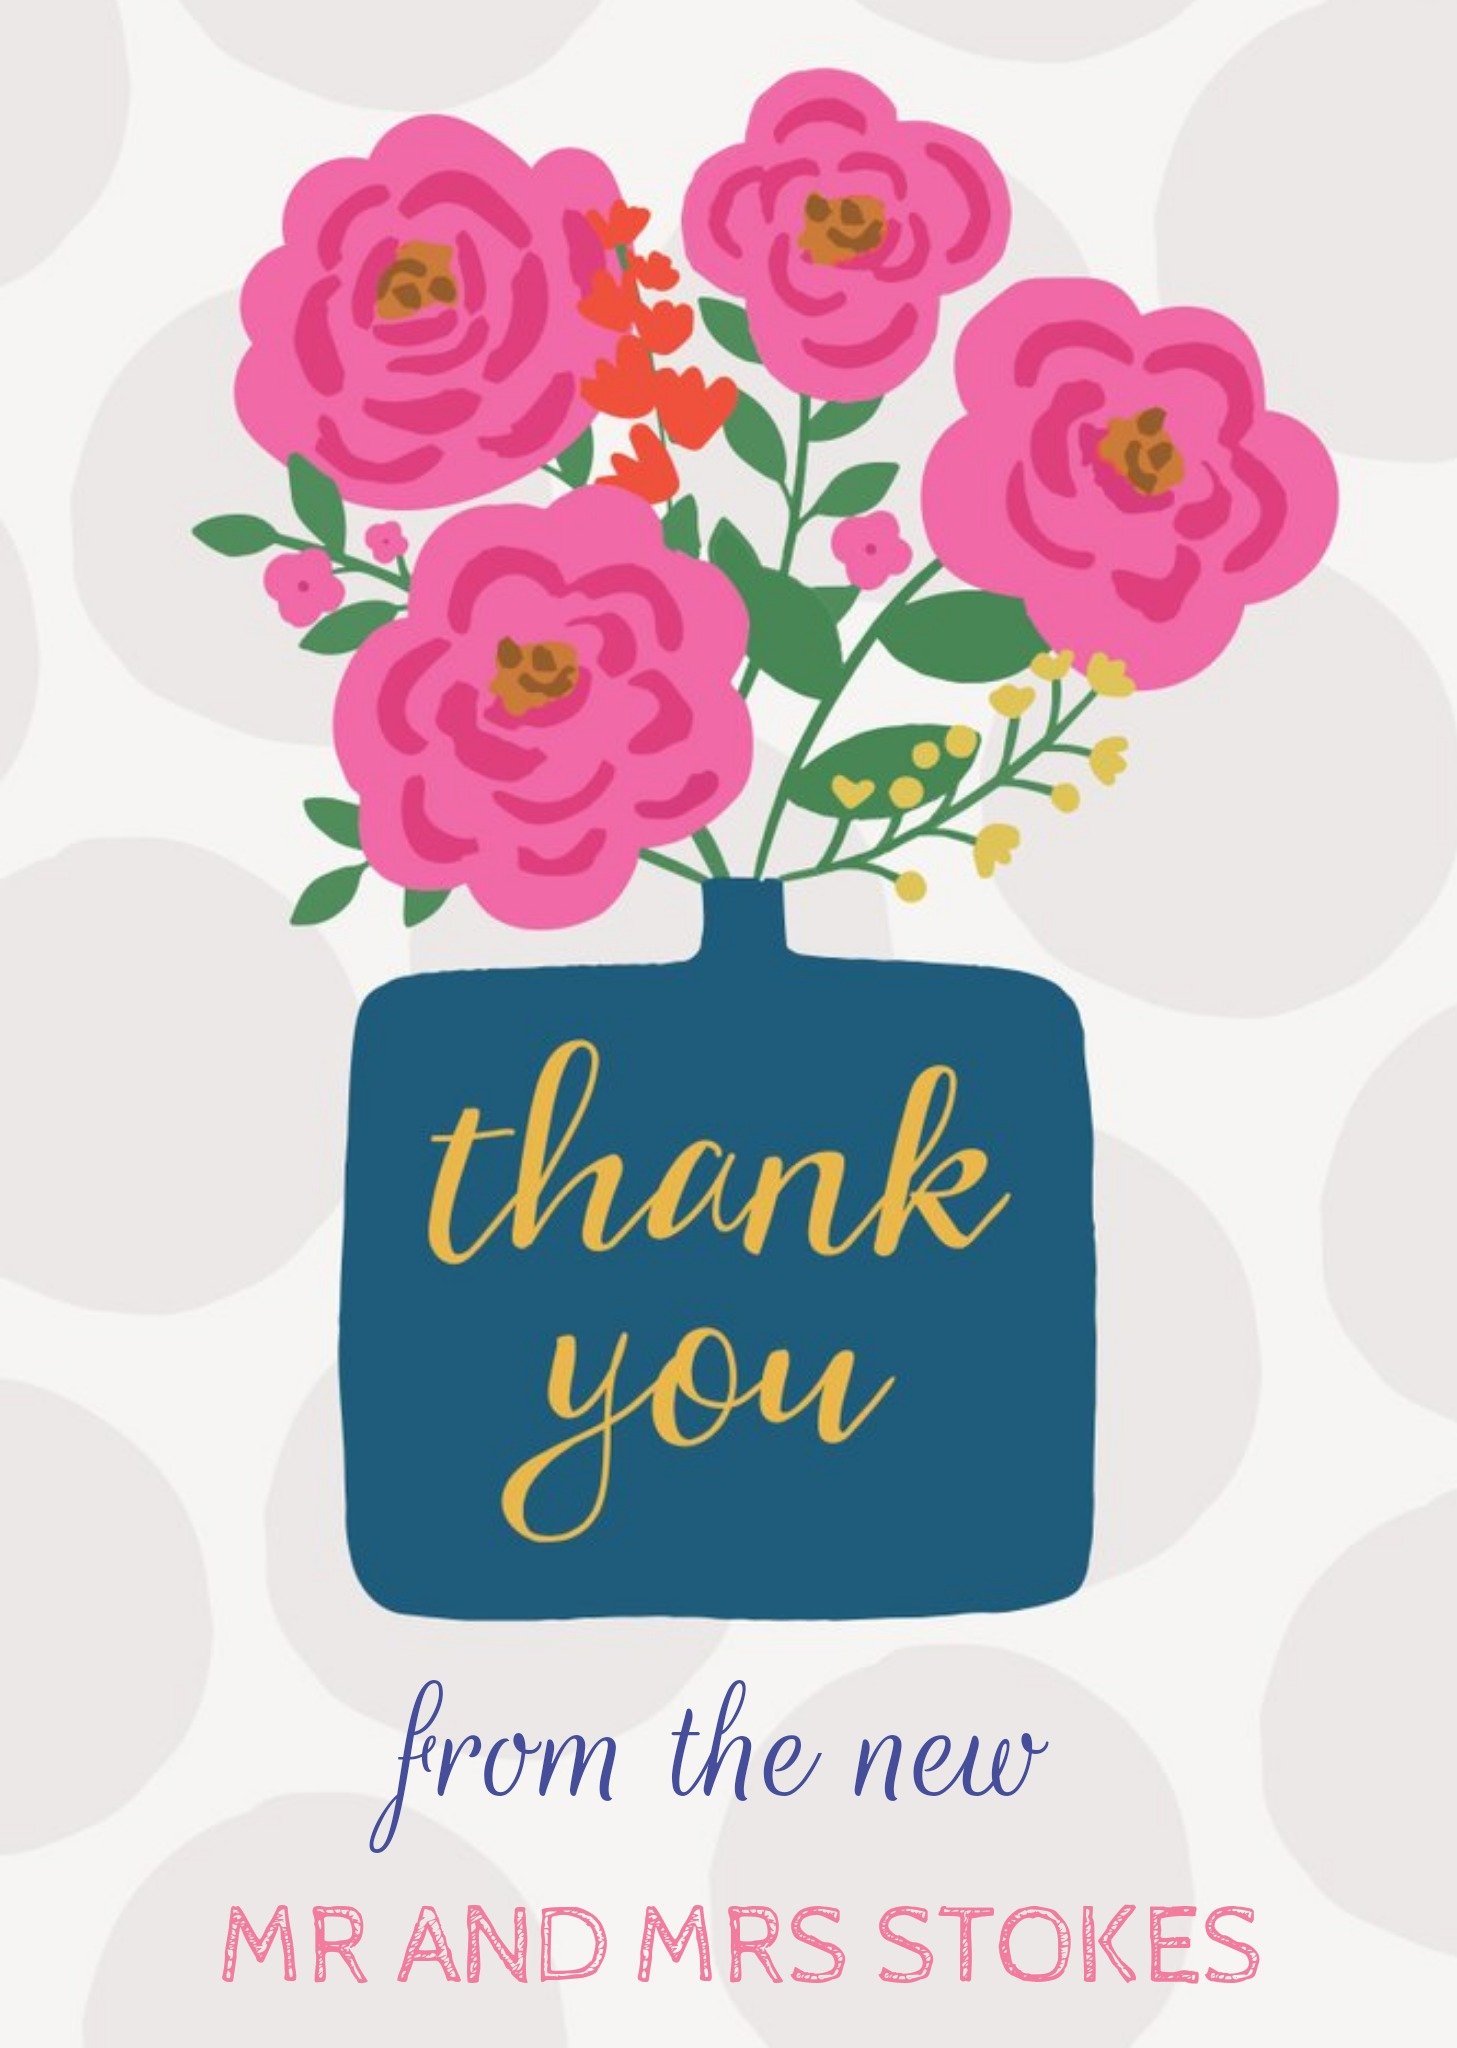 Moonpig Natalie Alex Designs Floral Personalised Thank You Card Ecard